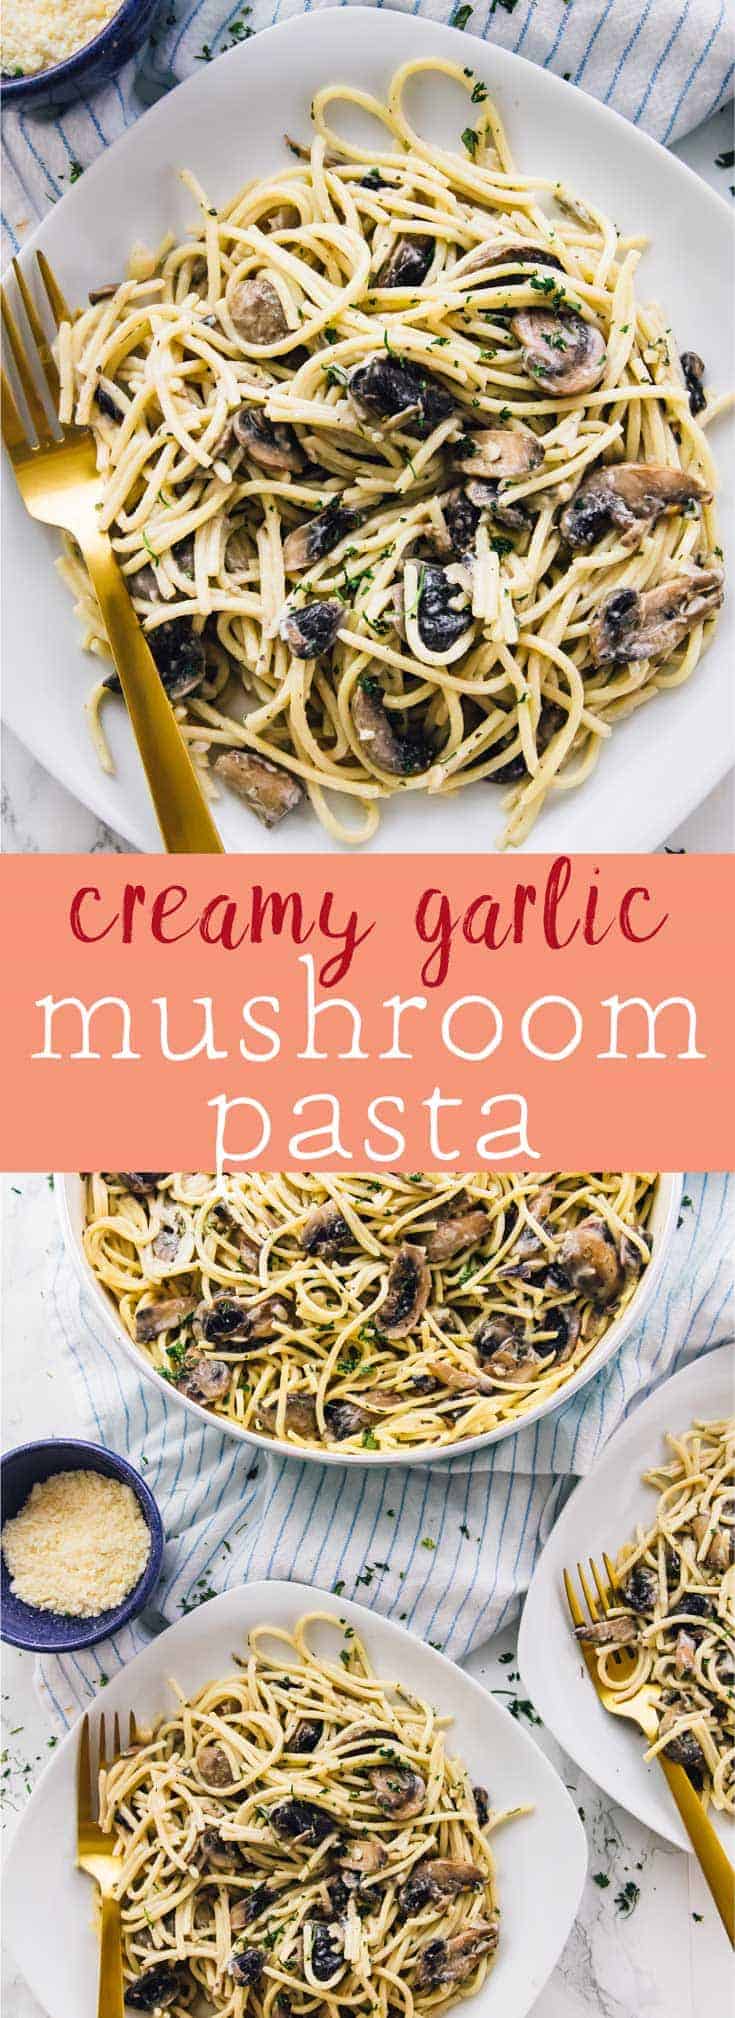 This Creamy Garlic Mushroom Pasta is done in just 30 minutes! It’s absolutely mouthwatering, so easy to make, and makes tons of servings! via https://jessicainthekitchen.com